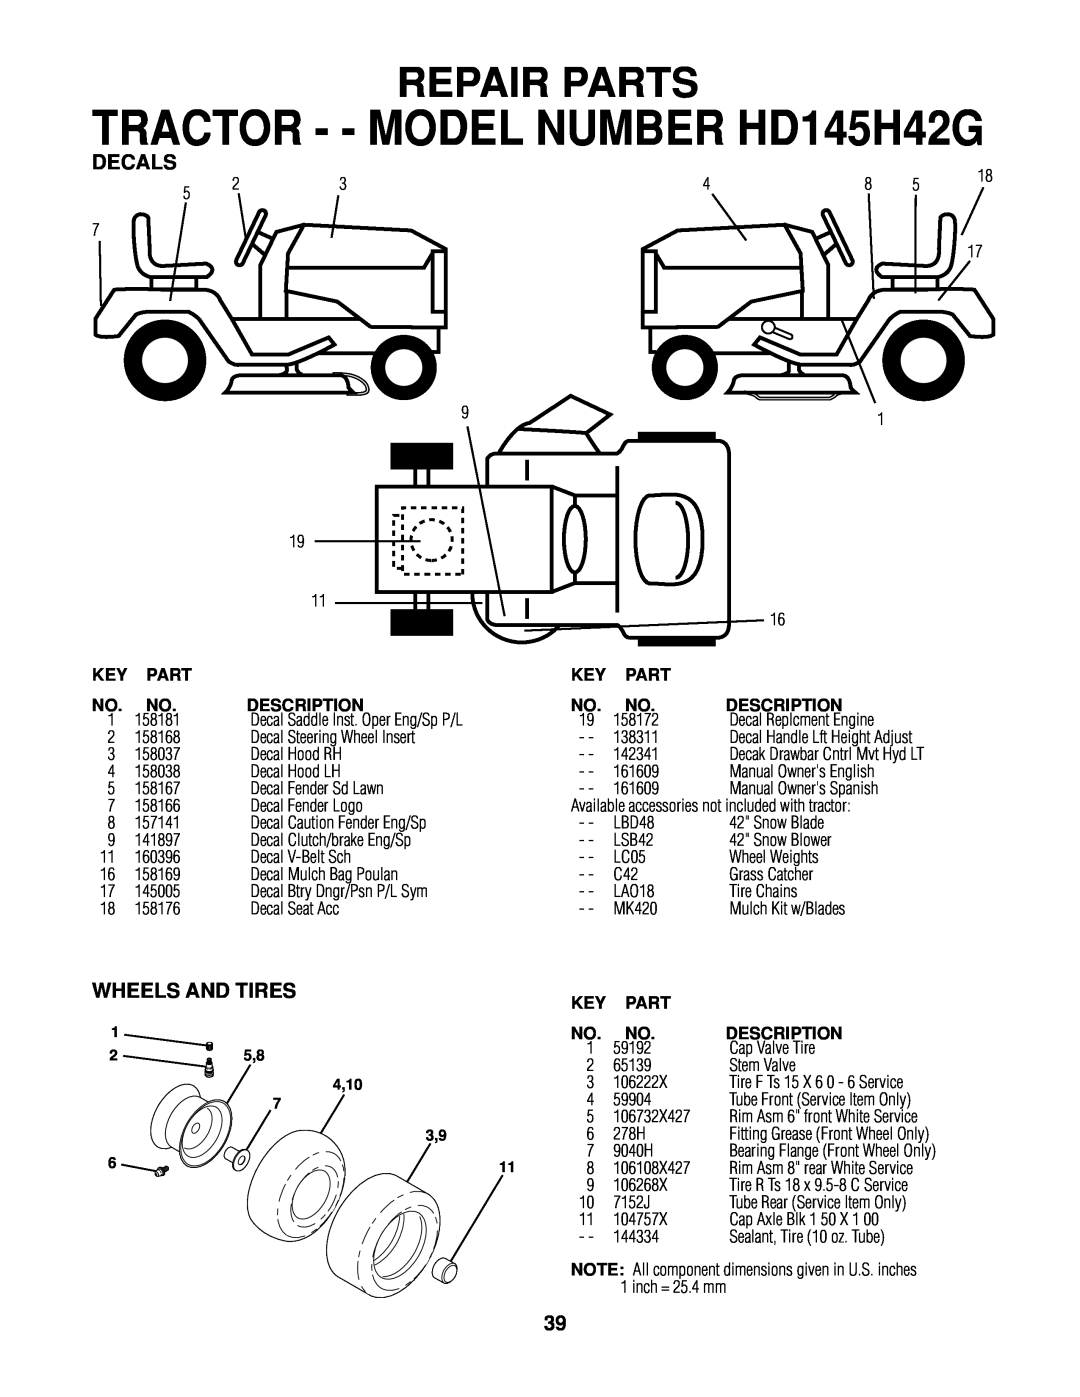 Poulan 161608 owner manual TRACTOR - - MODEL NUMBER HD145H42G, Repair Parts, Wheels And Tires, Decals 